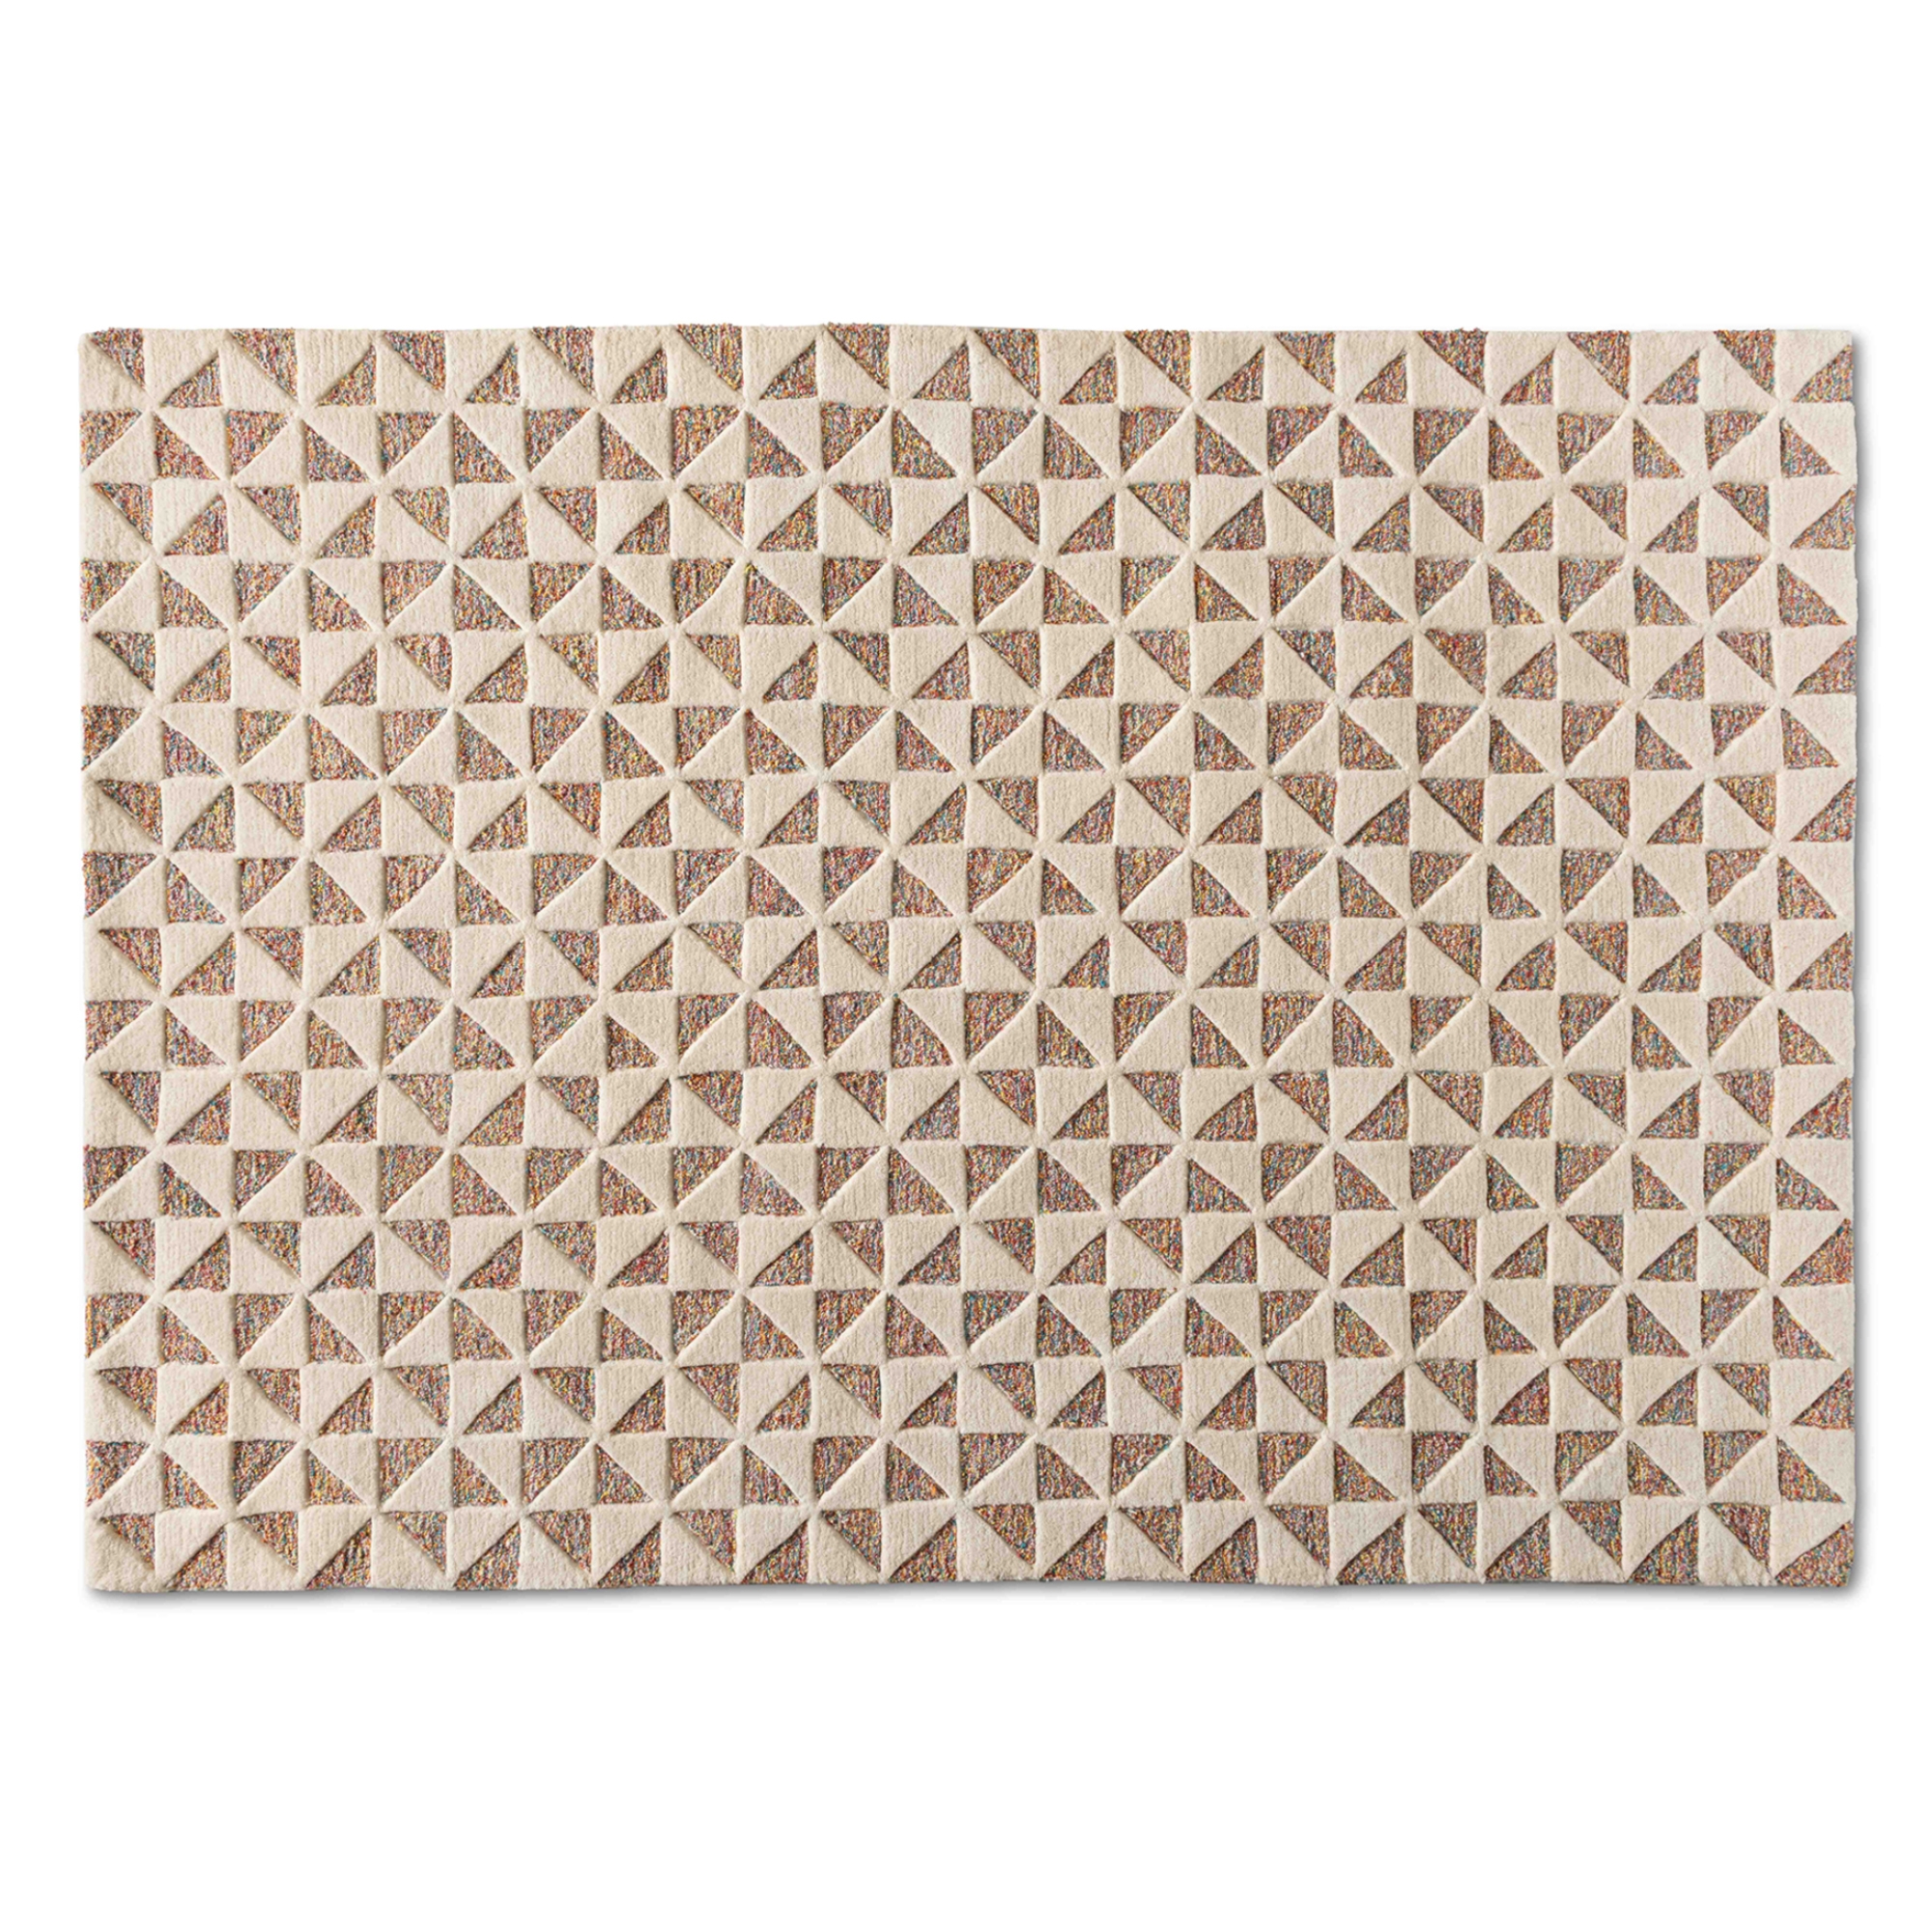 Baxton Studio Adusa Modern and Contemporary Multi-Colored Hand-Tufted Wool and Cotton Area Rug